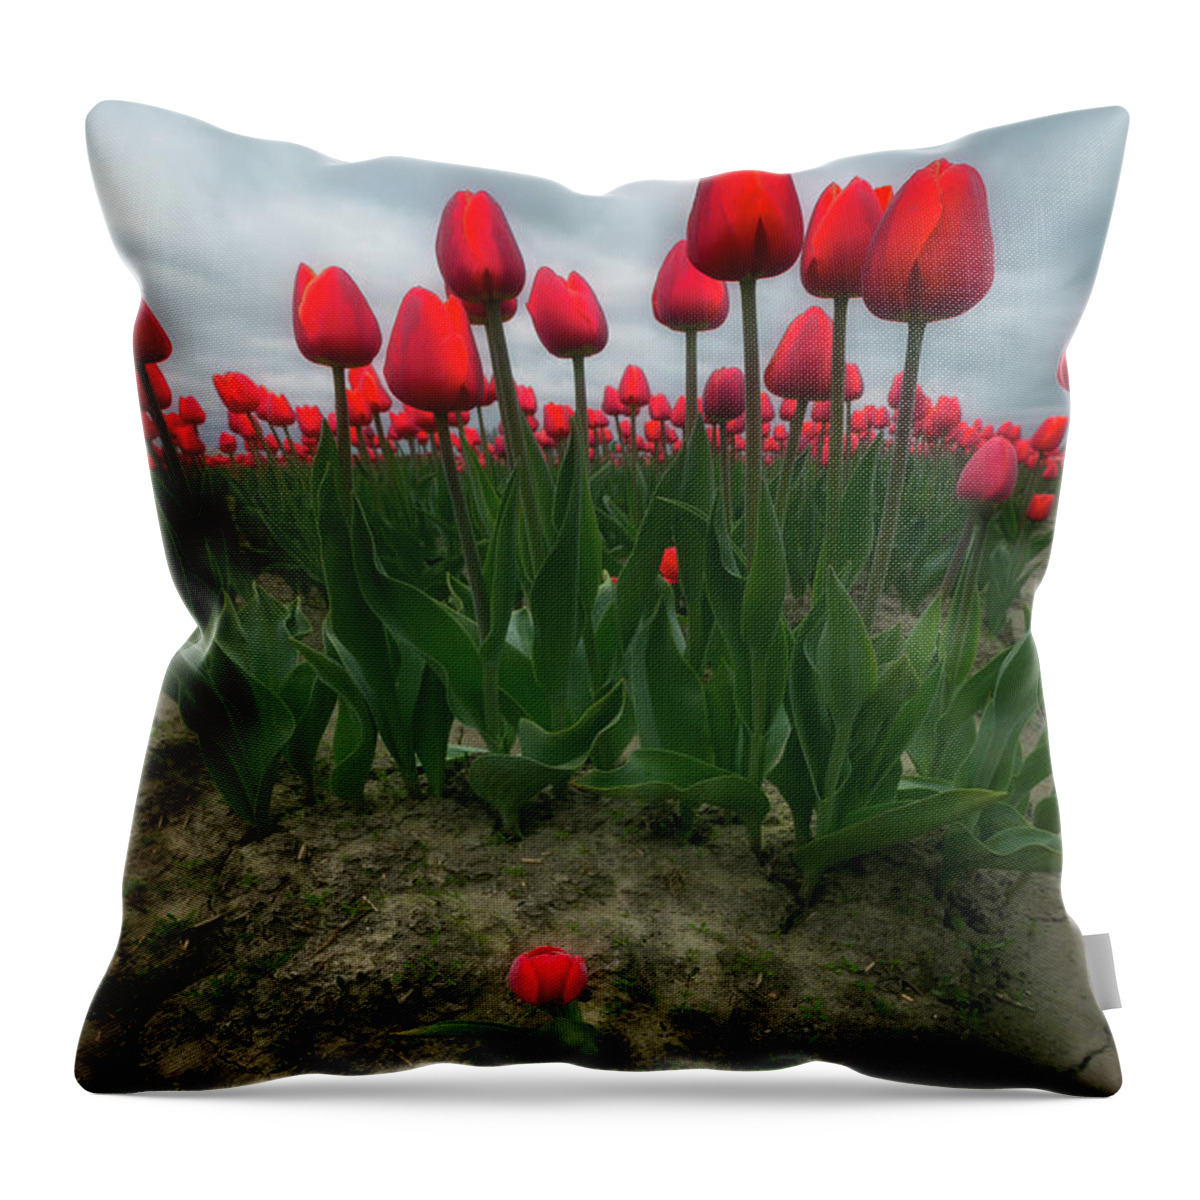 Roozengaarde Throw Pillow featuring the photograph David by Ryan Manuel